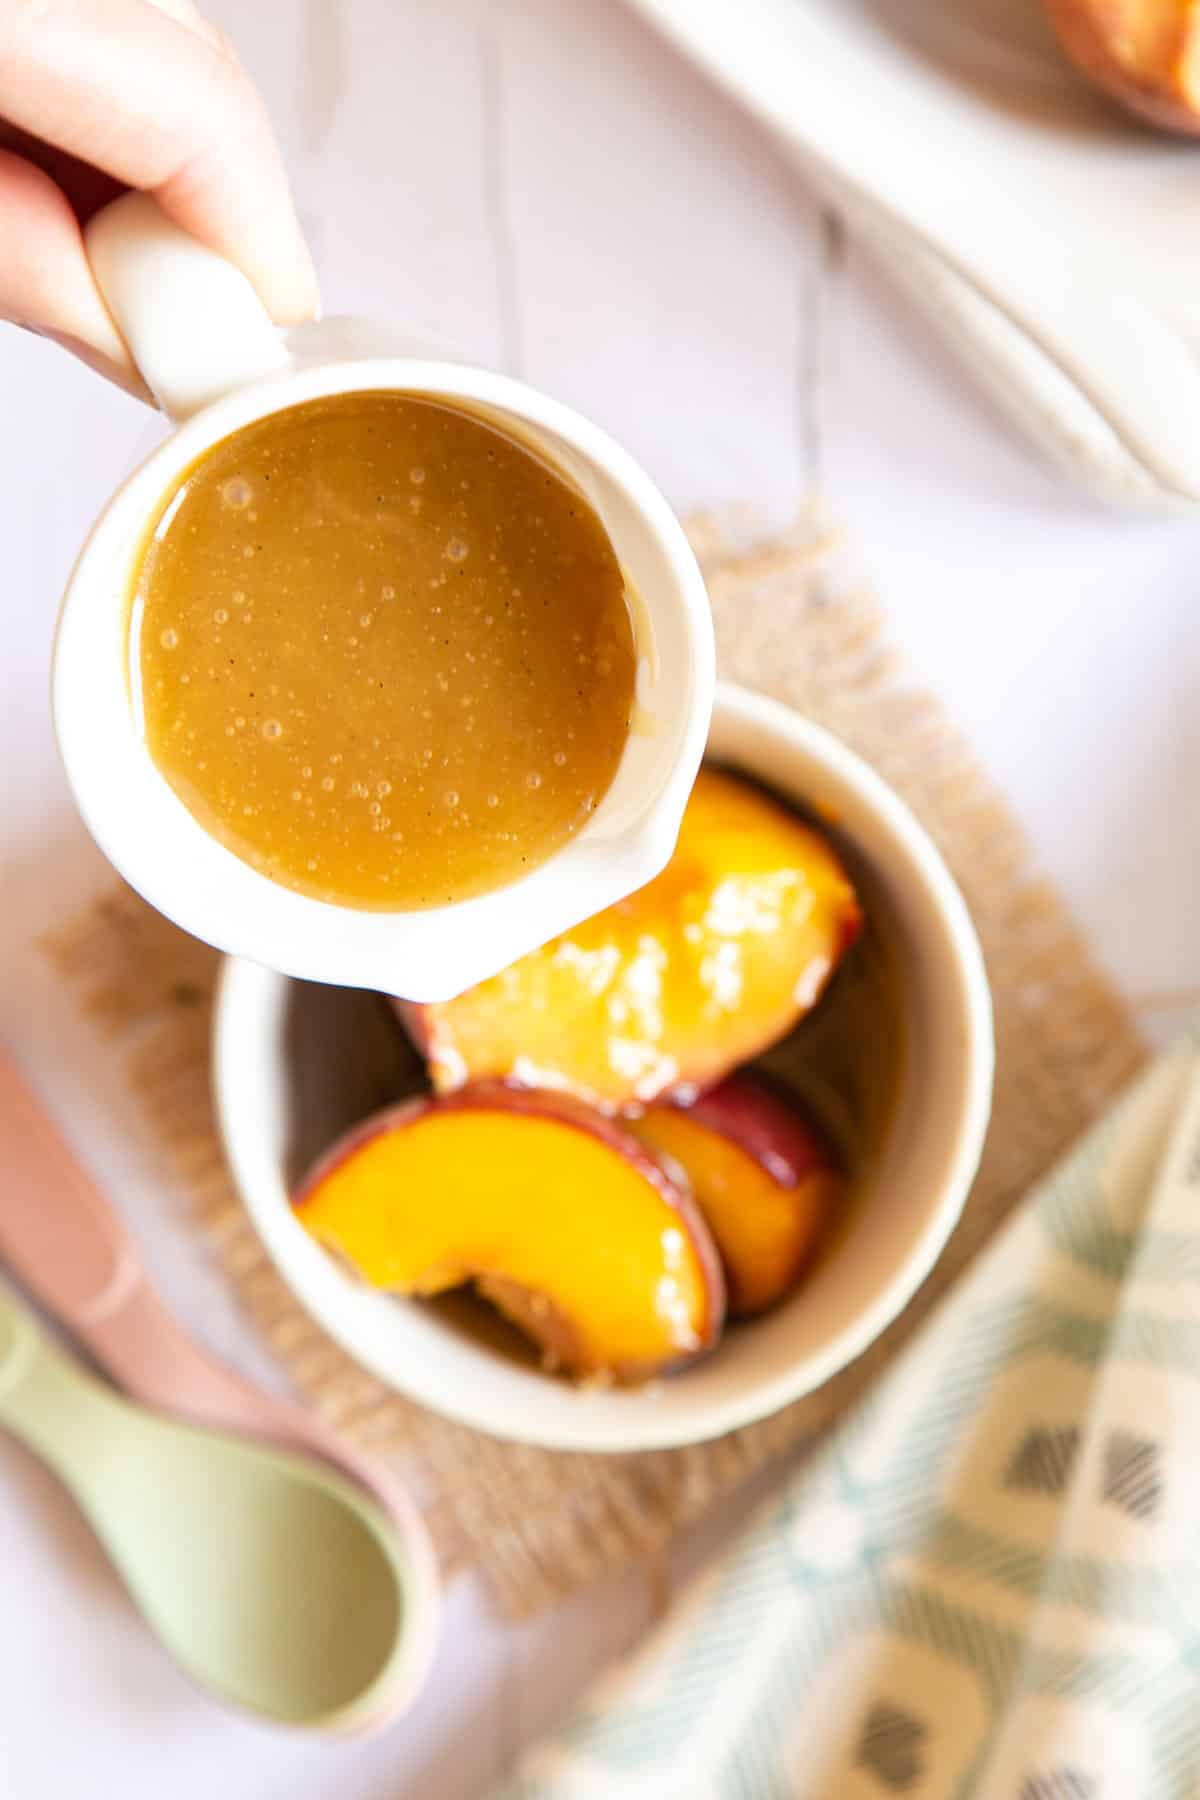 Adding more sauce to the peaches - delicious!